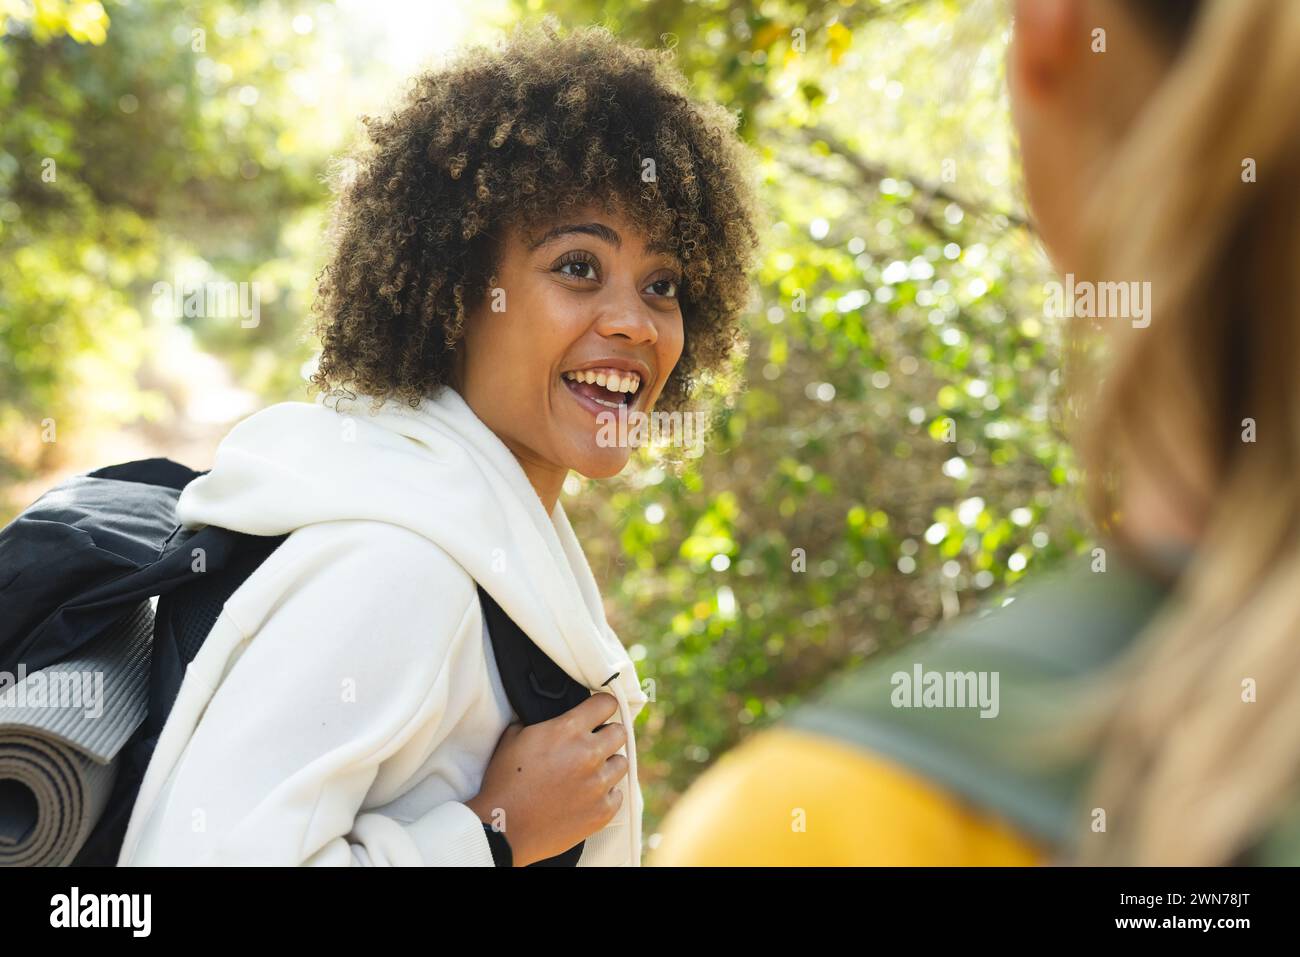 Young biracial woman with curly hair smiles brightly, carrying a backpack on a hike Stock Photo